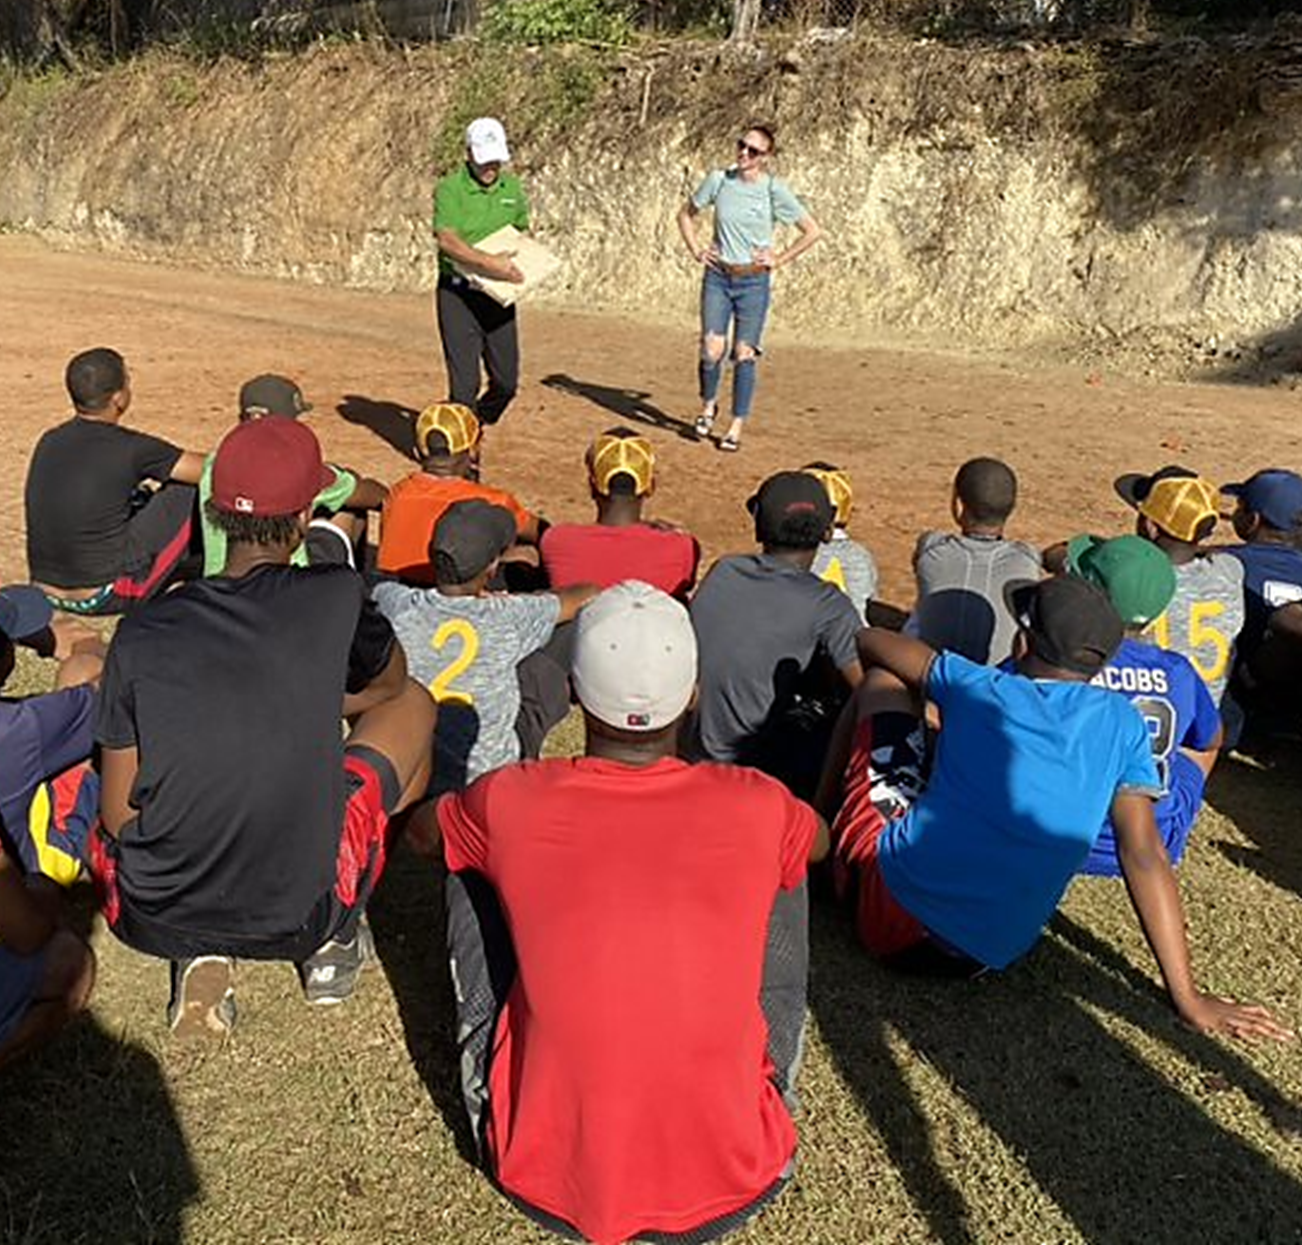 Coach Dan shares his baseball know-how with campers in the DR.png